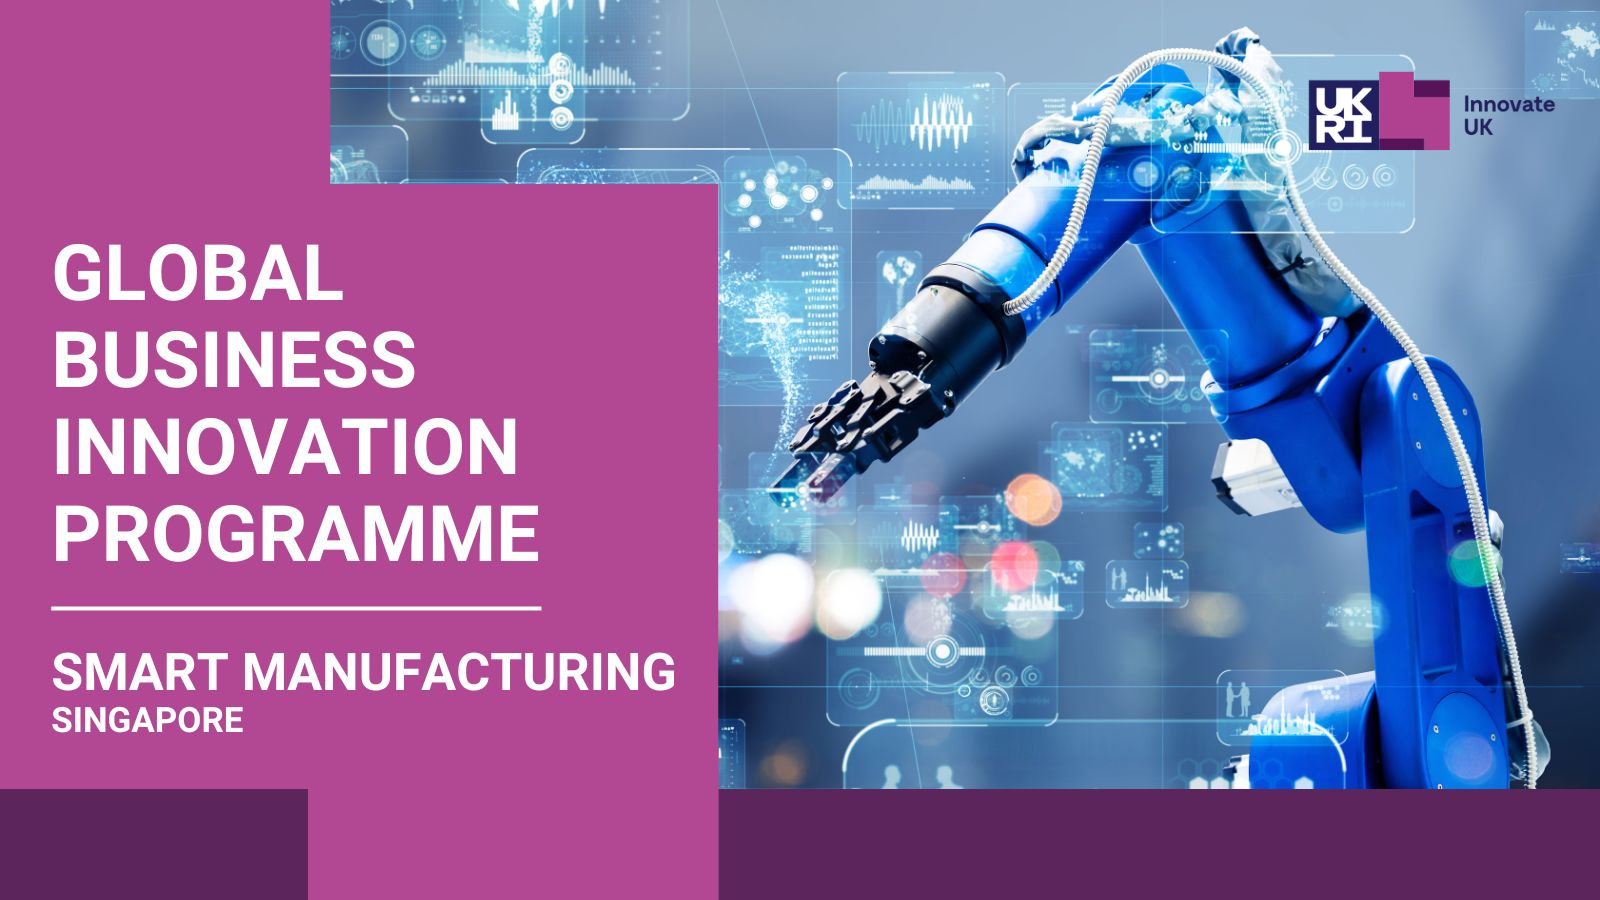 Global Business Innovation Programme - SMART MANUFACTURING SINGAPORE